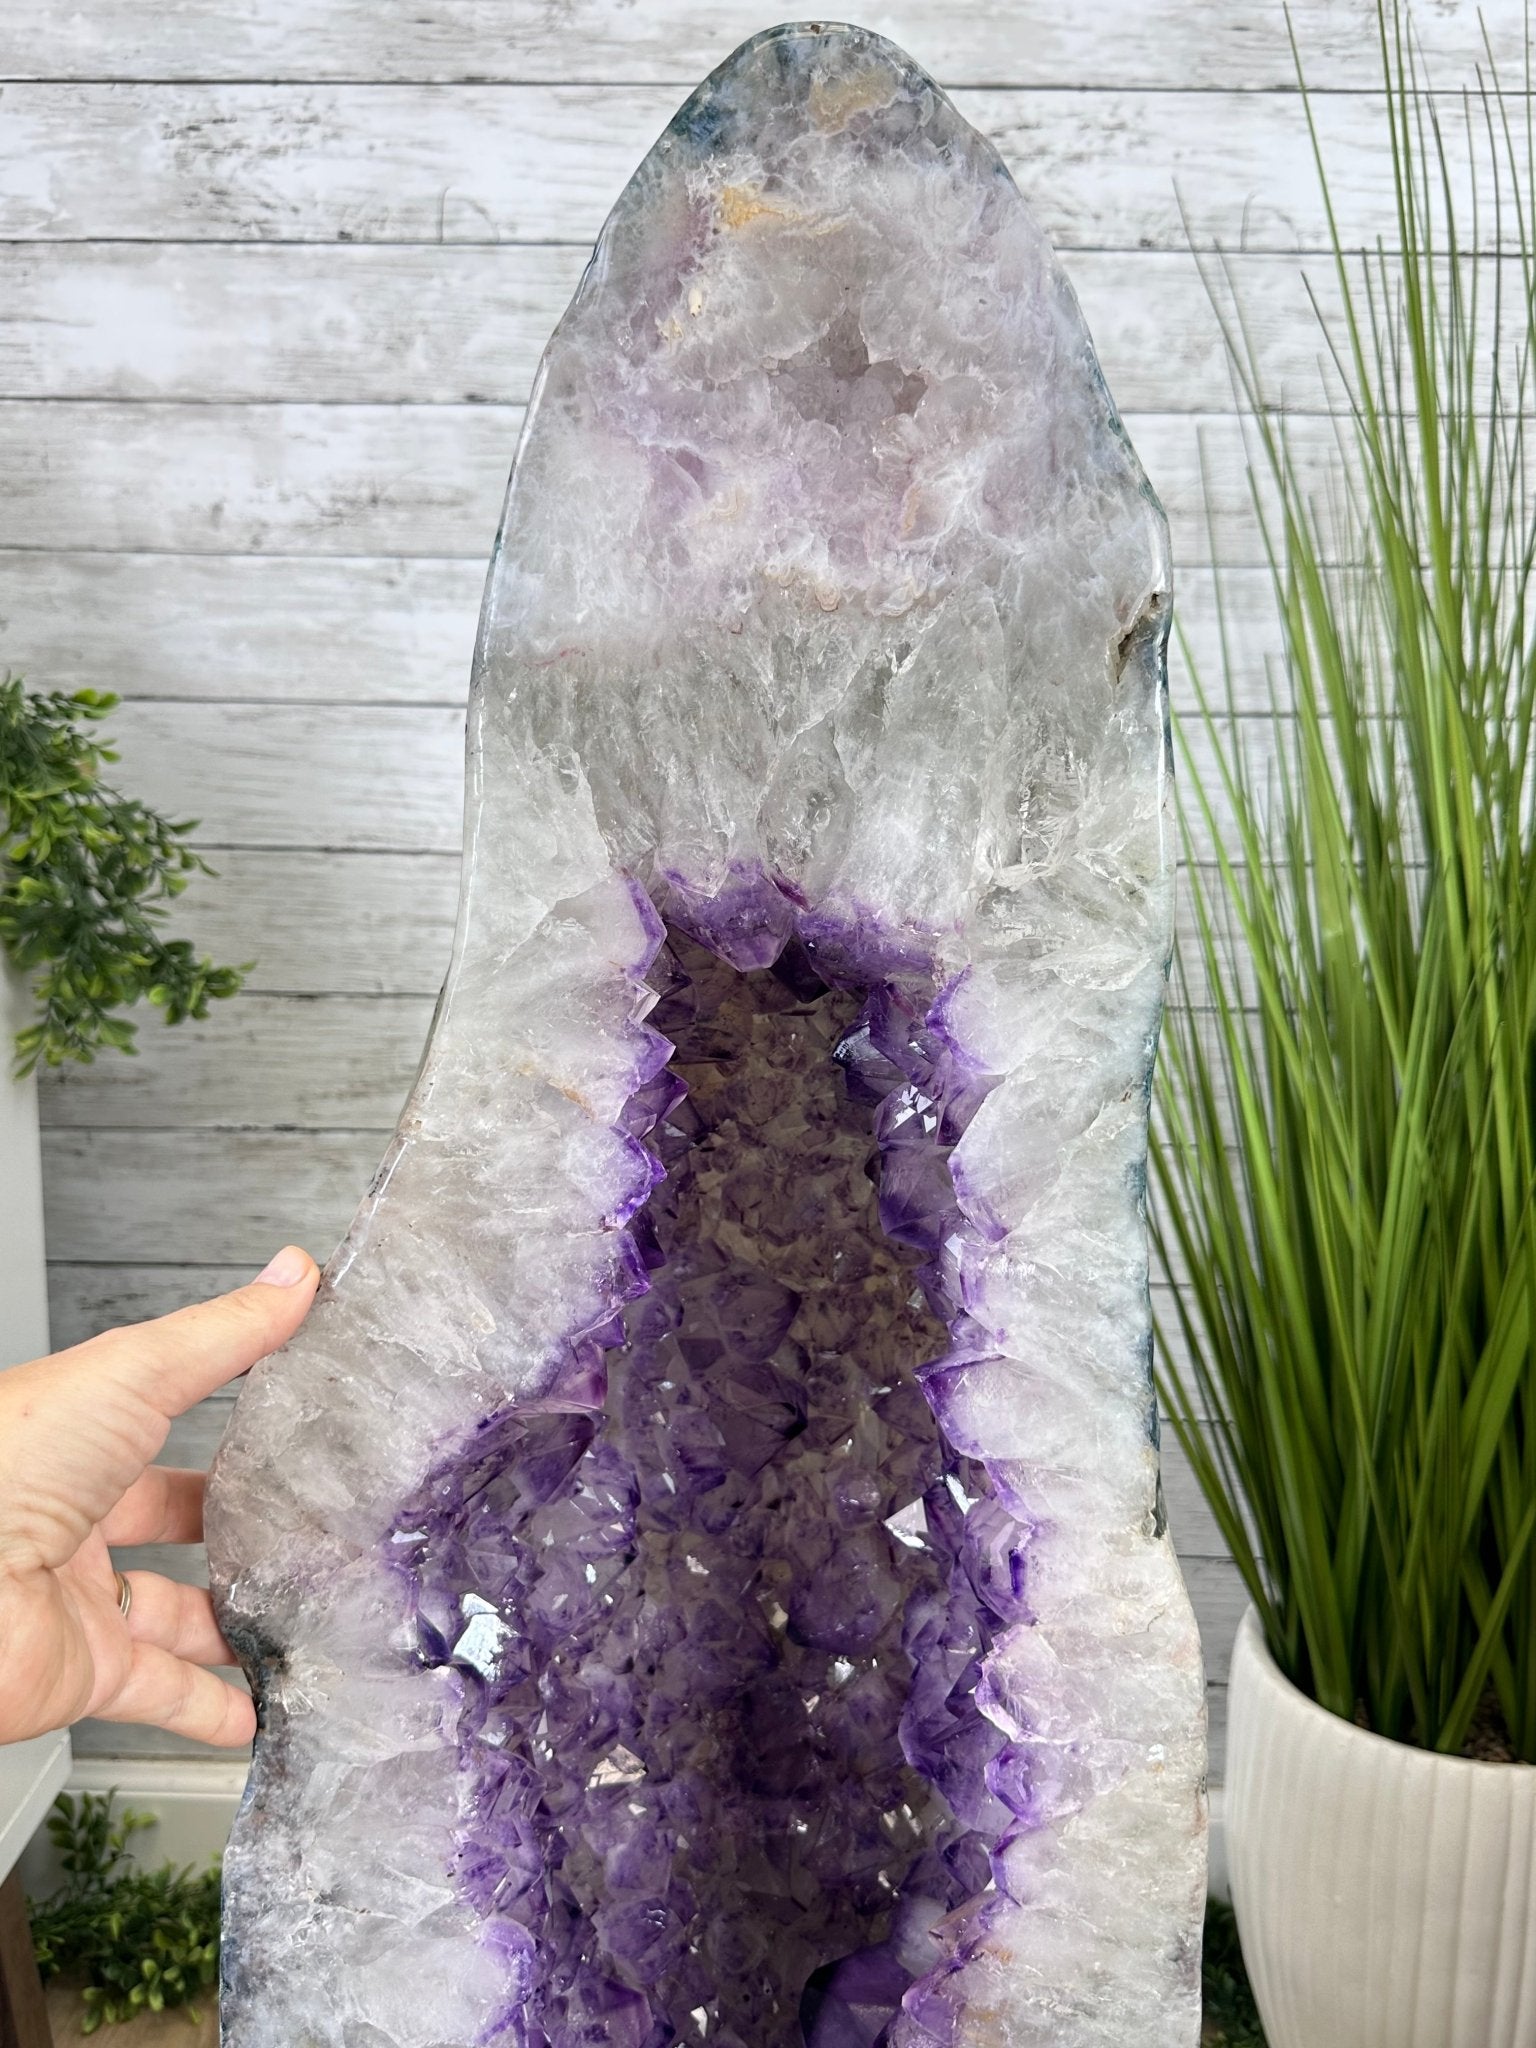 Extra Plus Quality Polished Brazilian Amethyst Cathedral, 148.2 lbs & 37.5" tall Model #5602-0183 by Brazil Gems - Brazil GemsBrazil GemsExtra Plus Quality Polished Brazilian Amethyst Cathedral, 148.2 lbs & 37.5" tall Model #5602-0183 by Brazil GemsPolished Cathedrals5602-0183